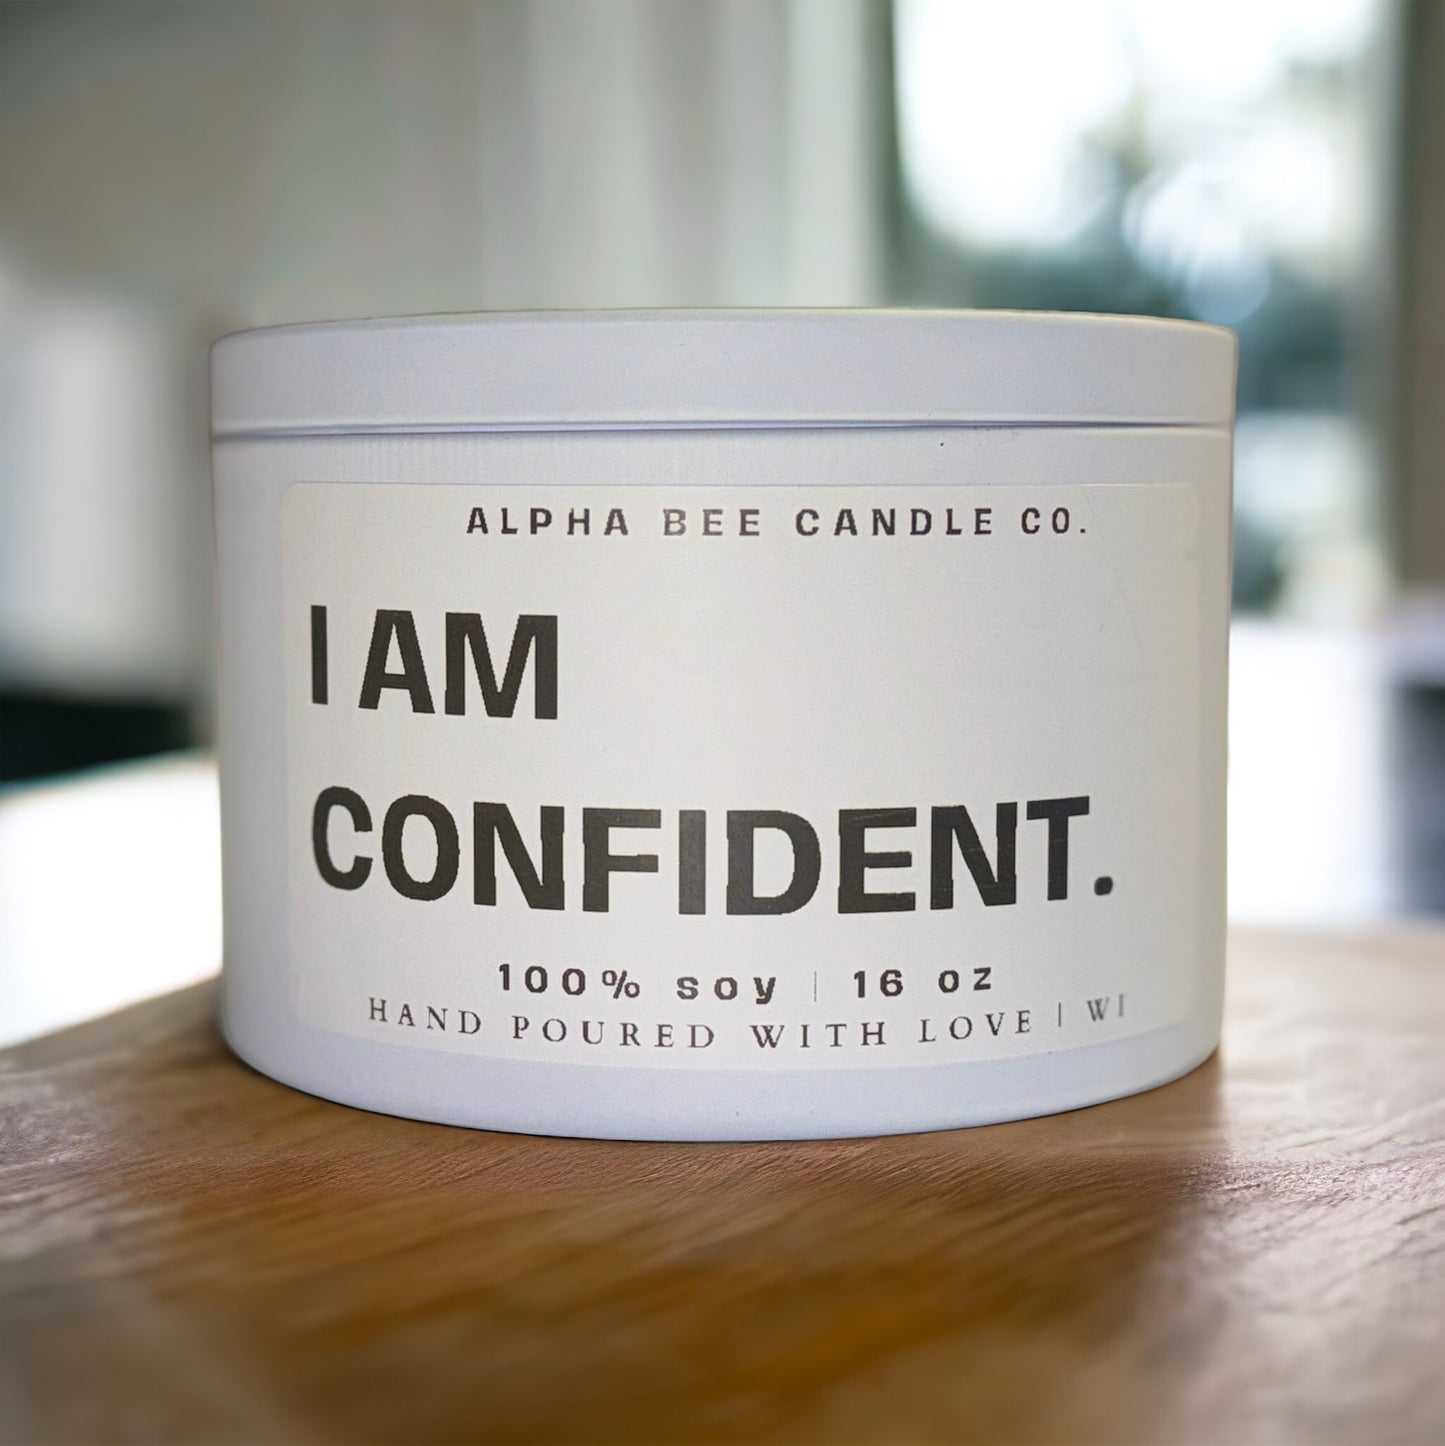 Affirmation Candle